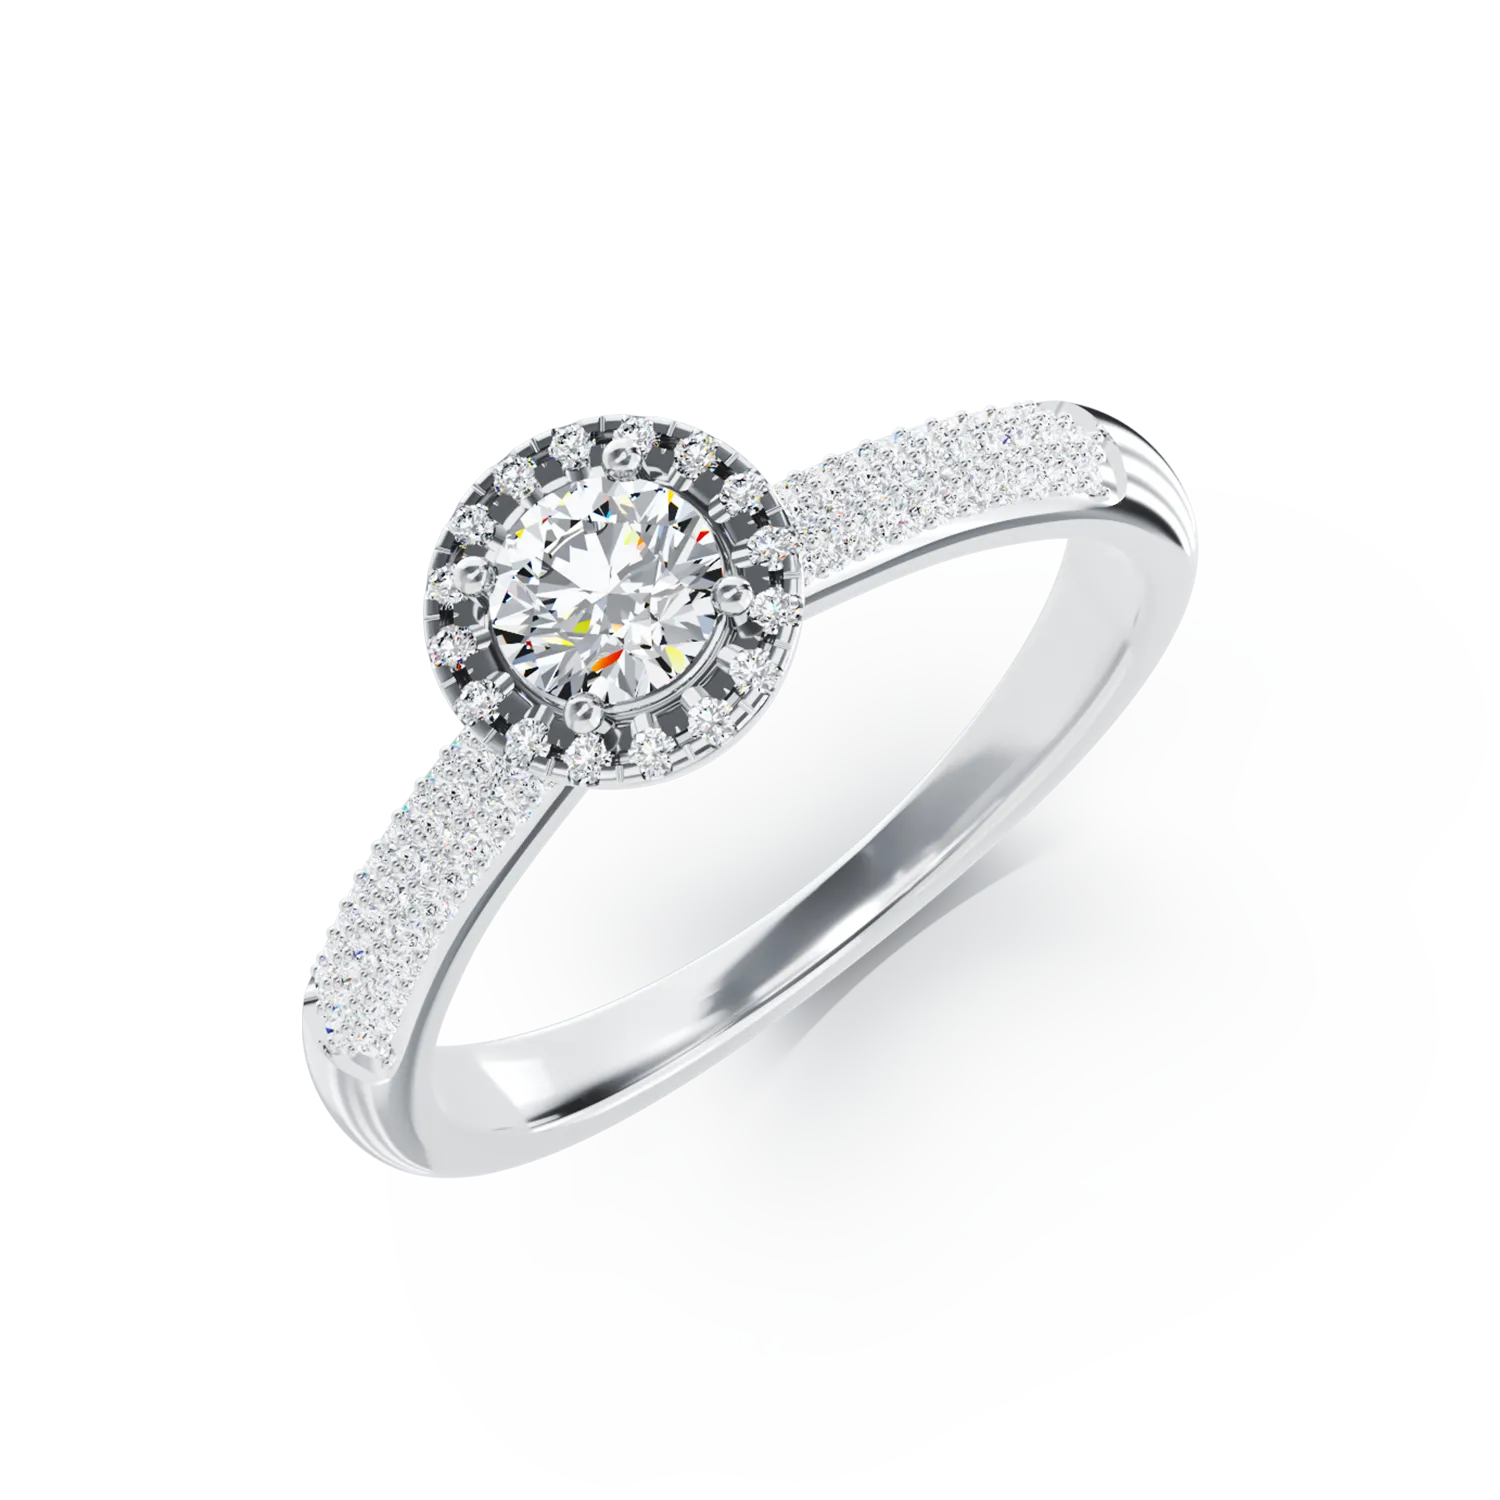 18K white gold engagement ring with 0.33ct diamond and 0.36ct diamonds